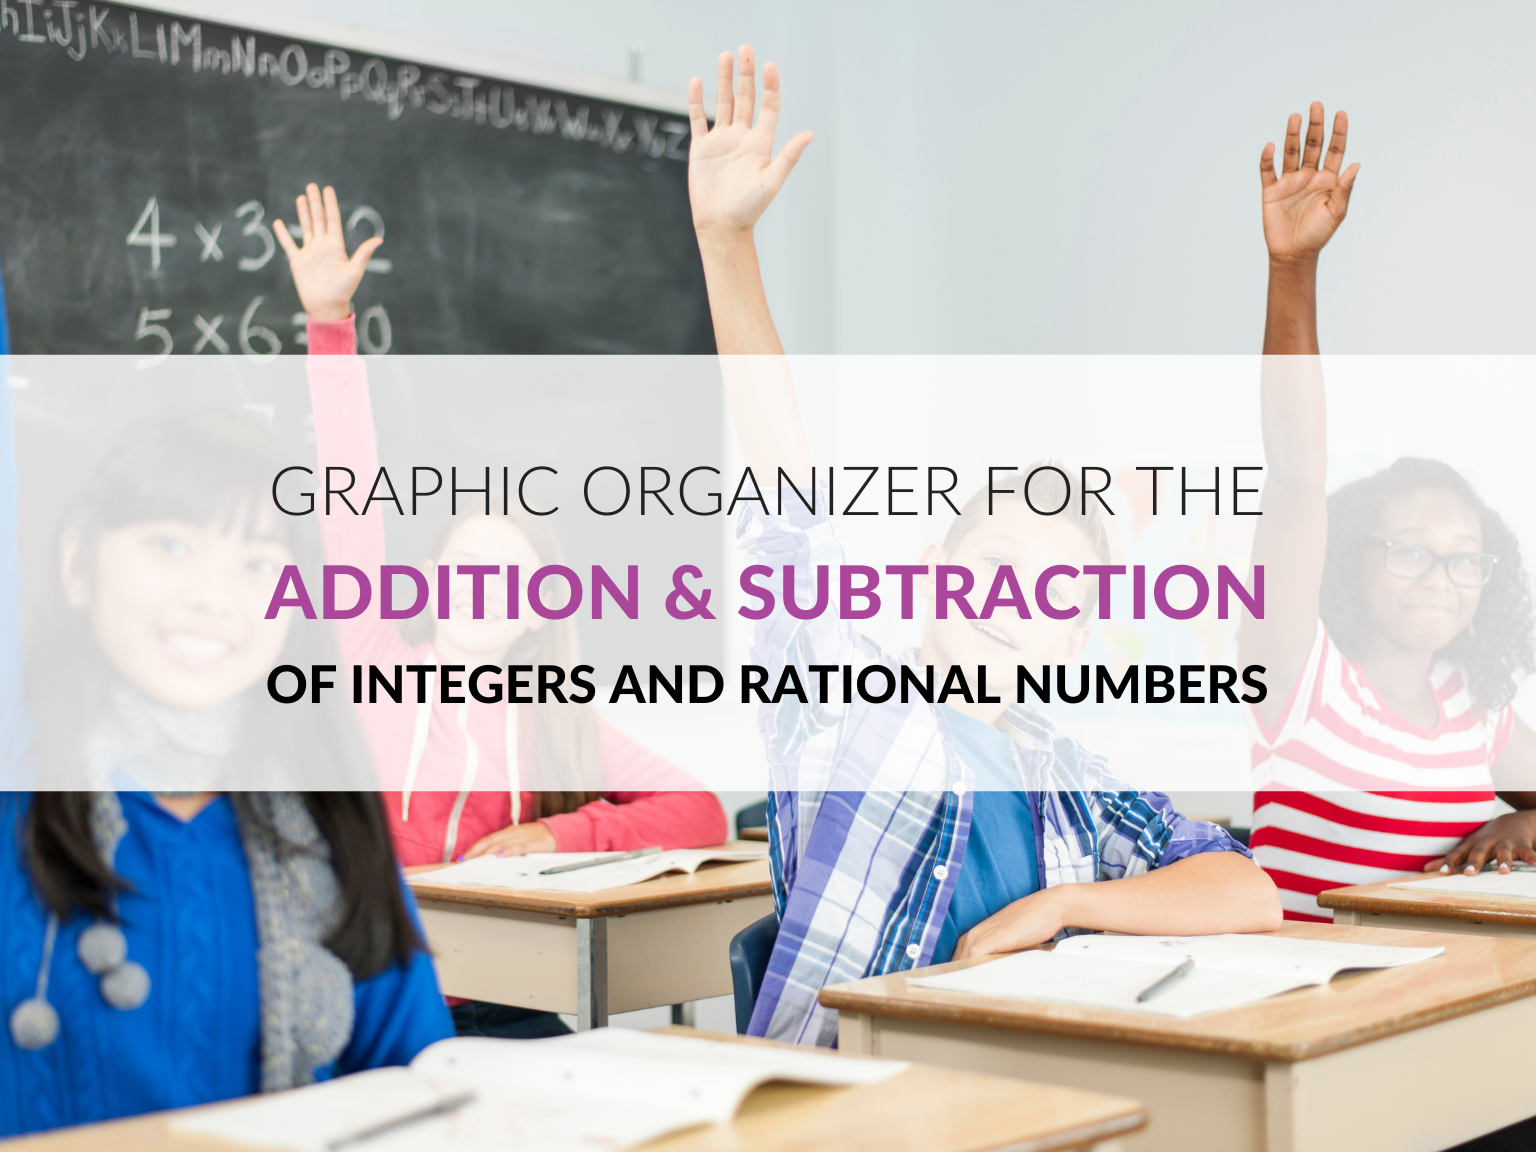 Graphic-organizer-Addition-and-Subtraction-of-Integers-and-Rational-Numbers